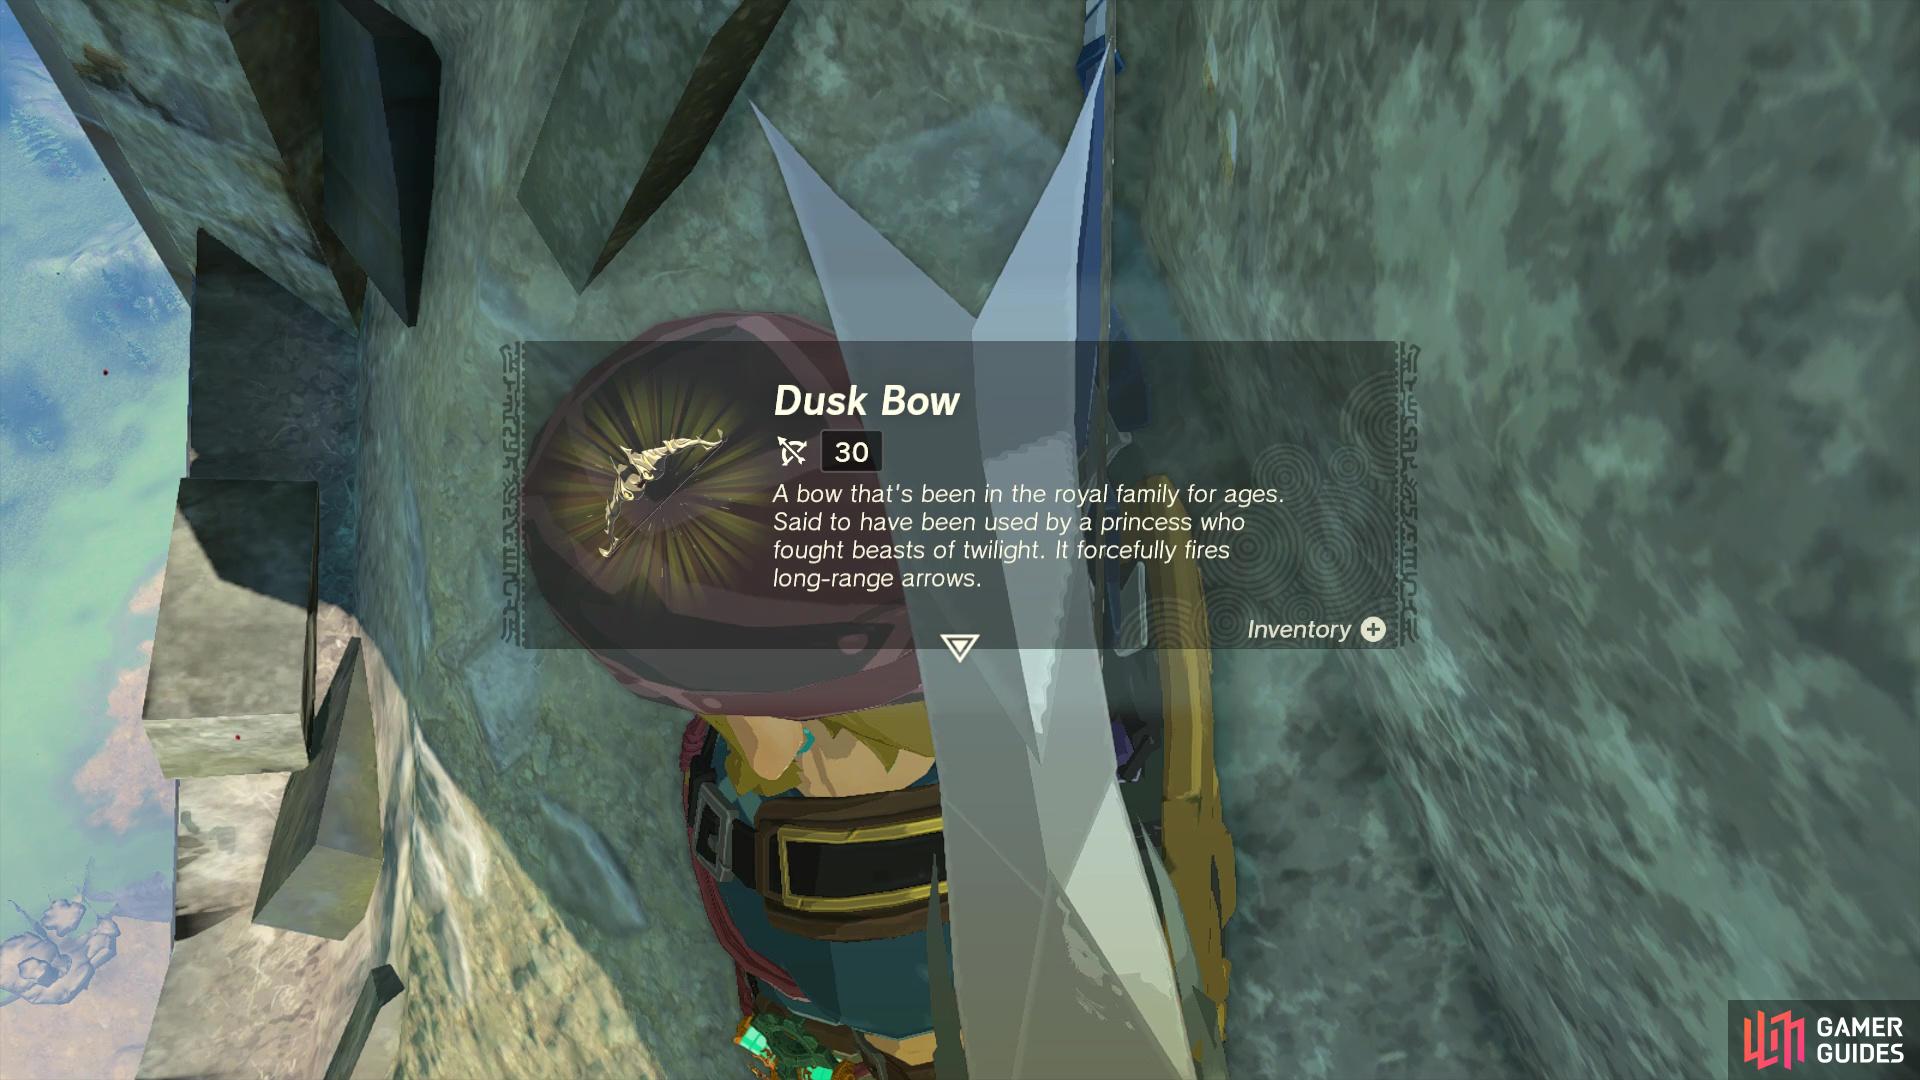 The Dusk Bow is a powerful bow found at Hyrule Castle.